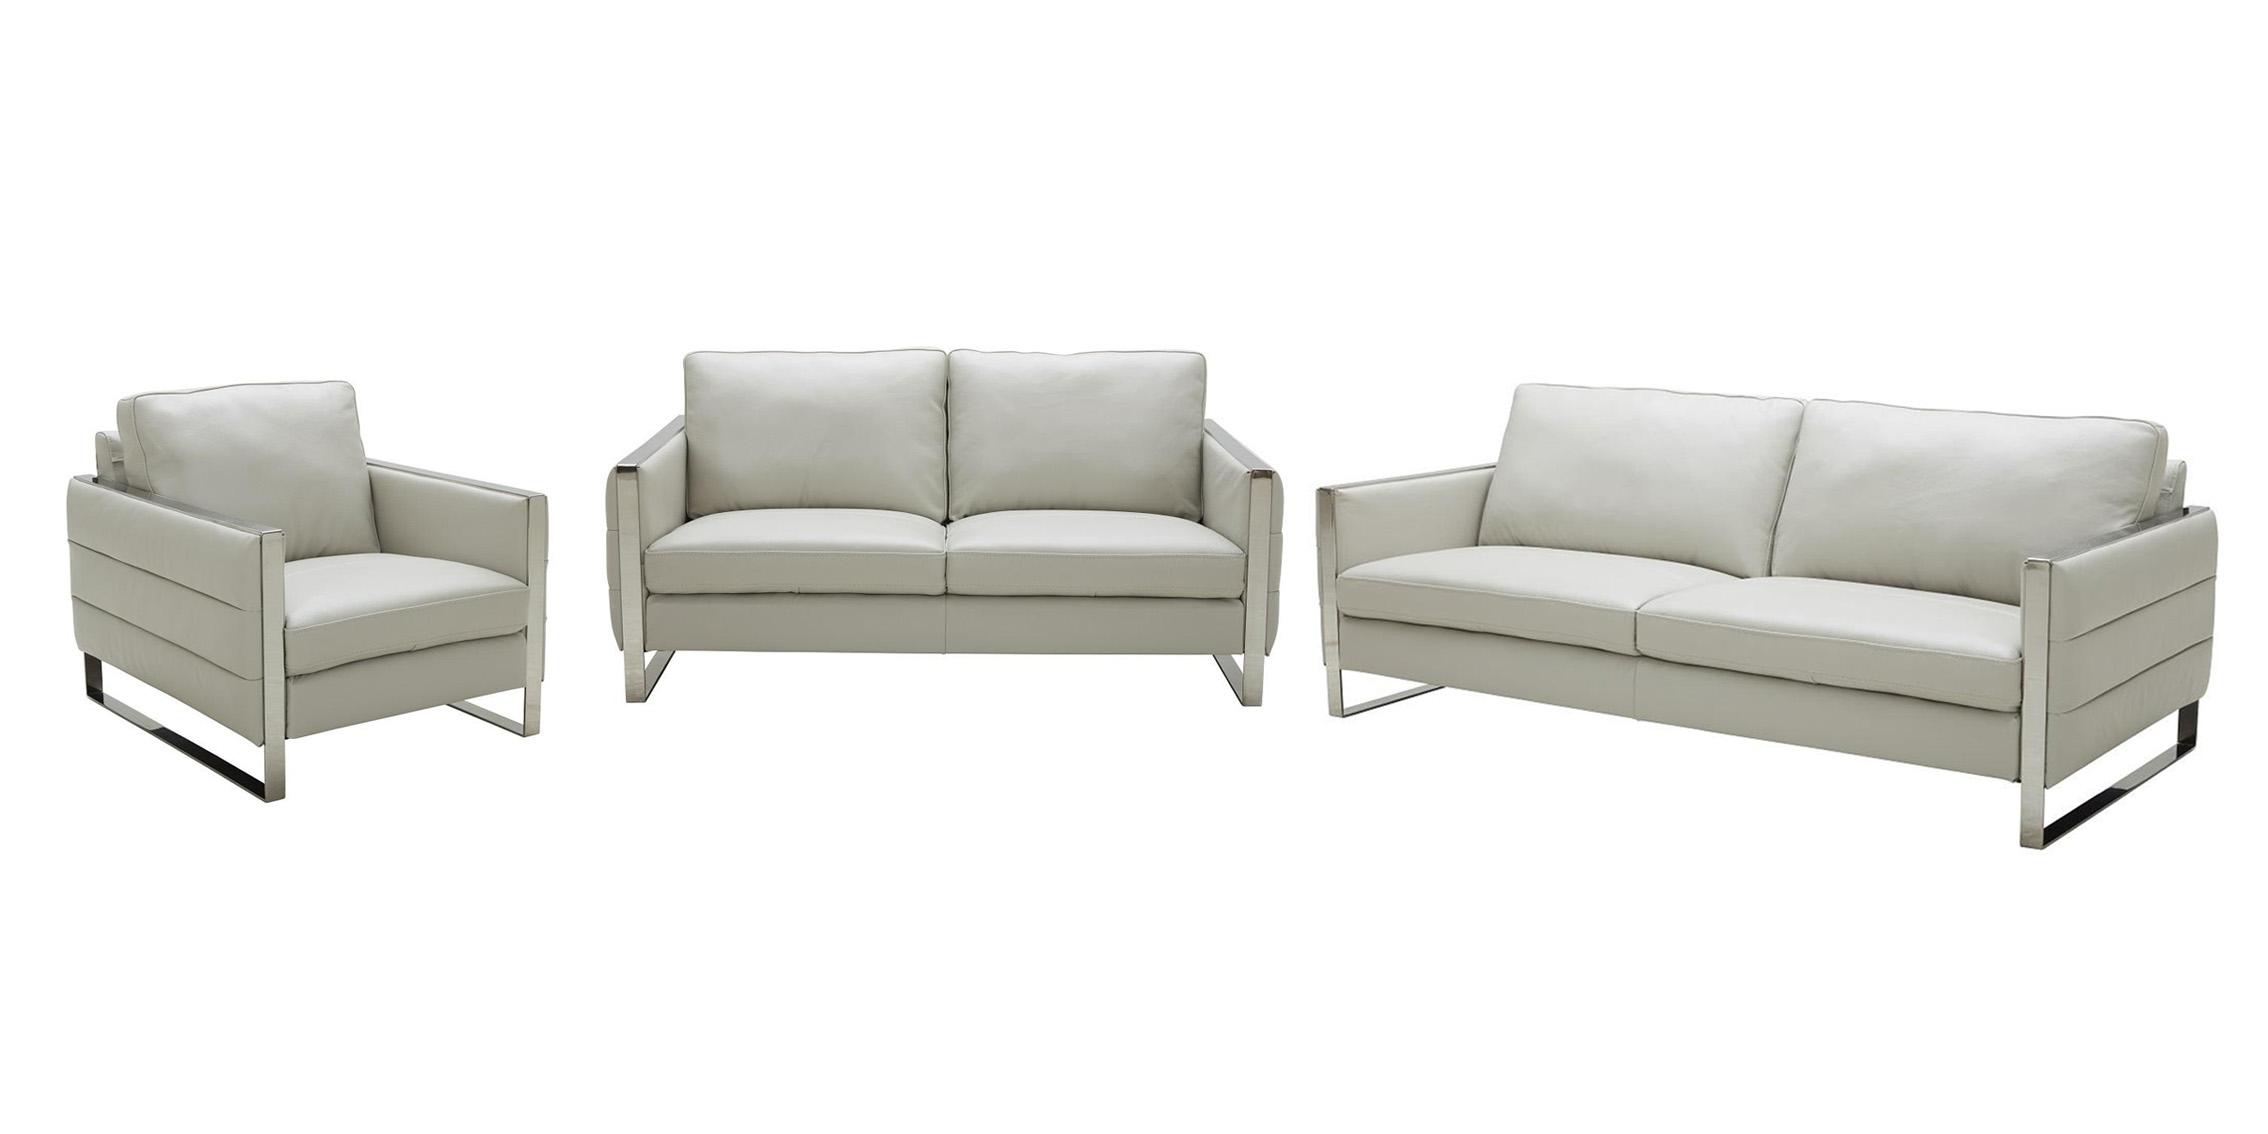 Contemporary Sofa Loveseat and Chair Set Constantin SKU18723 -Set-3 in Light Gray Italian Leather